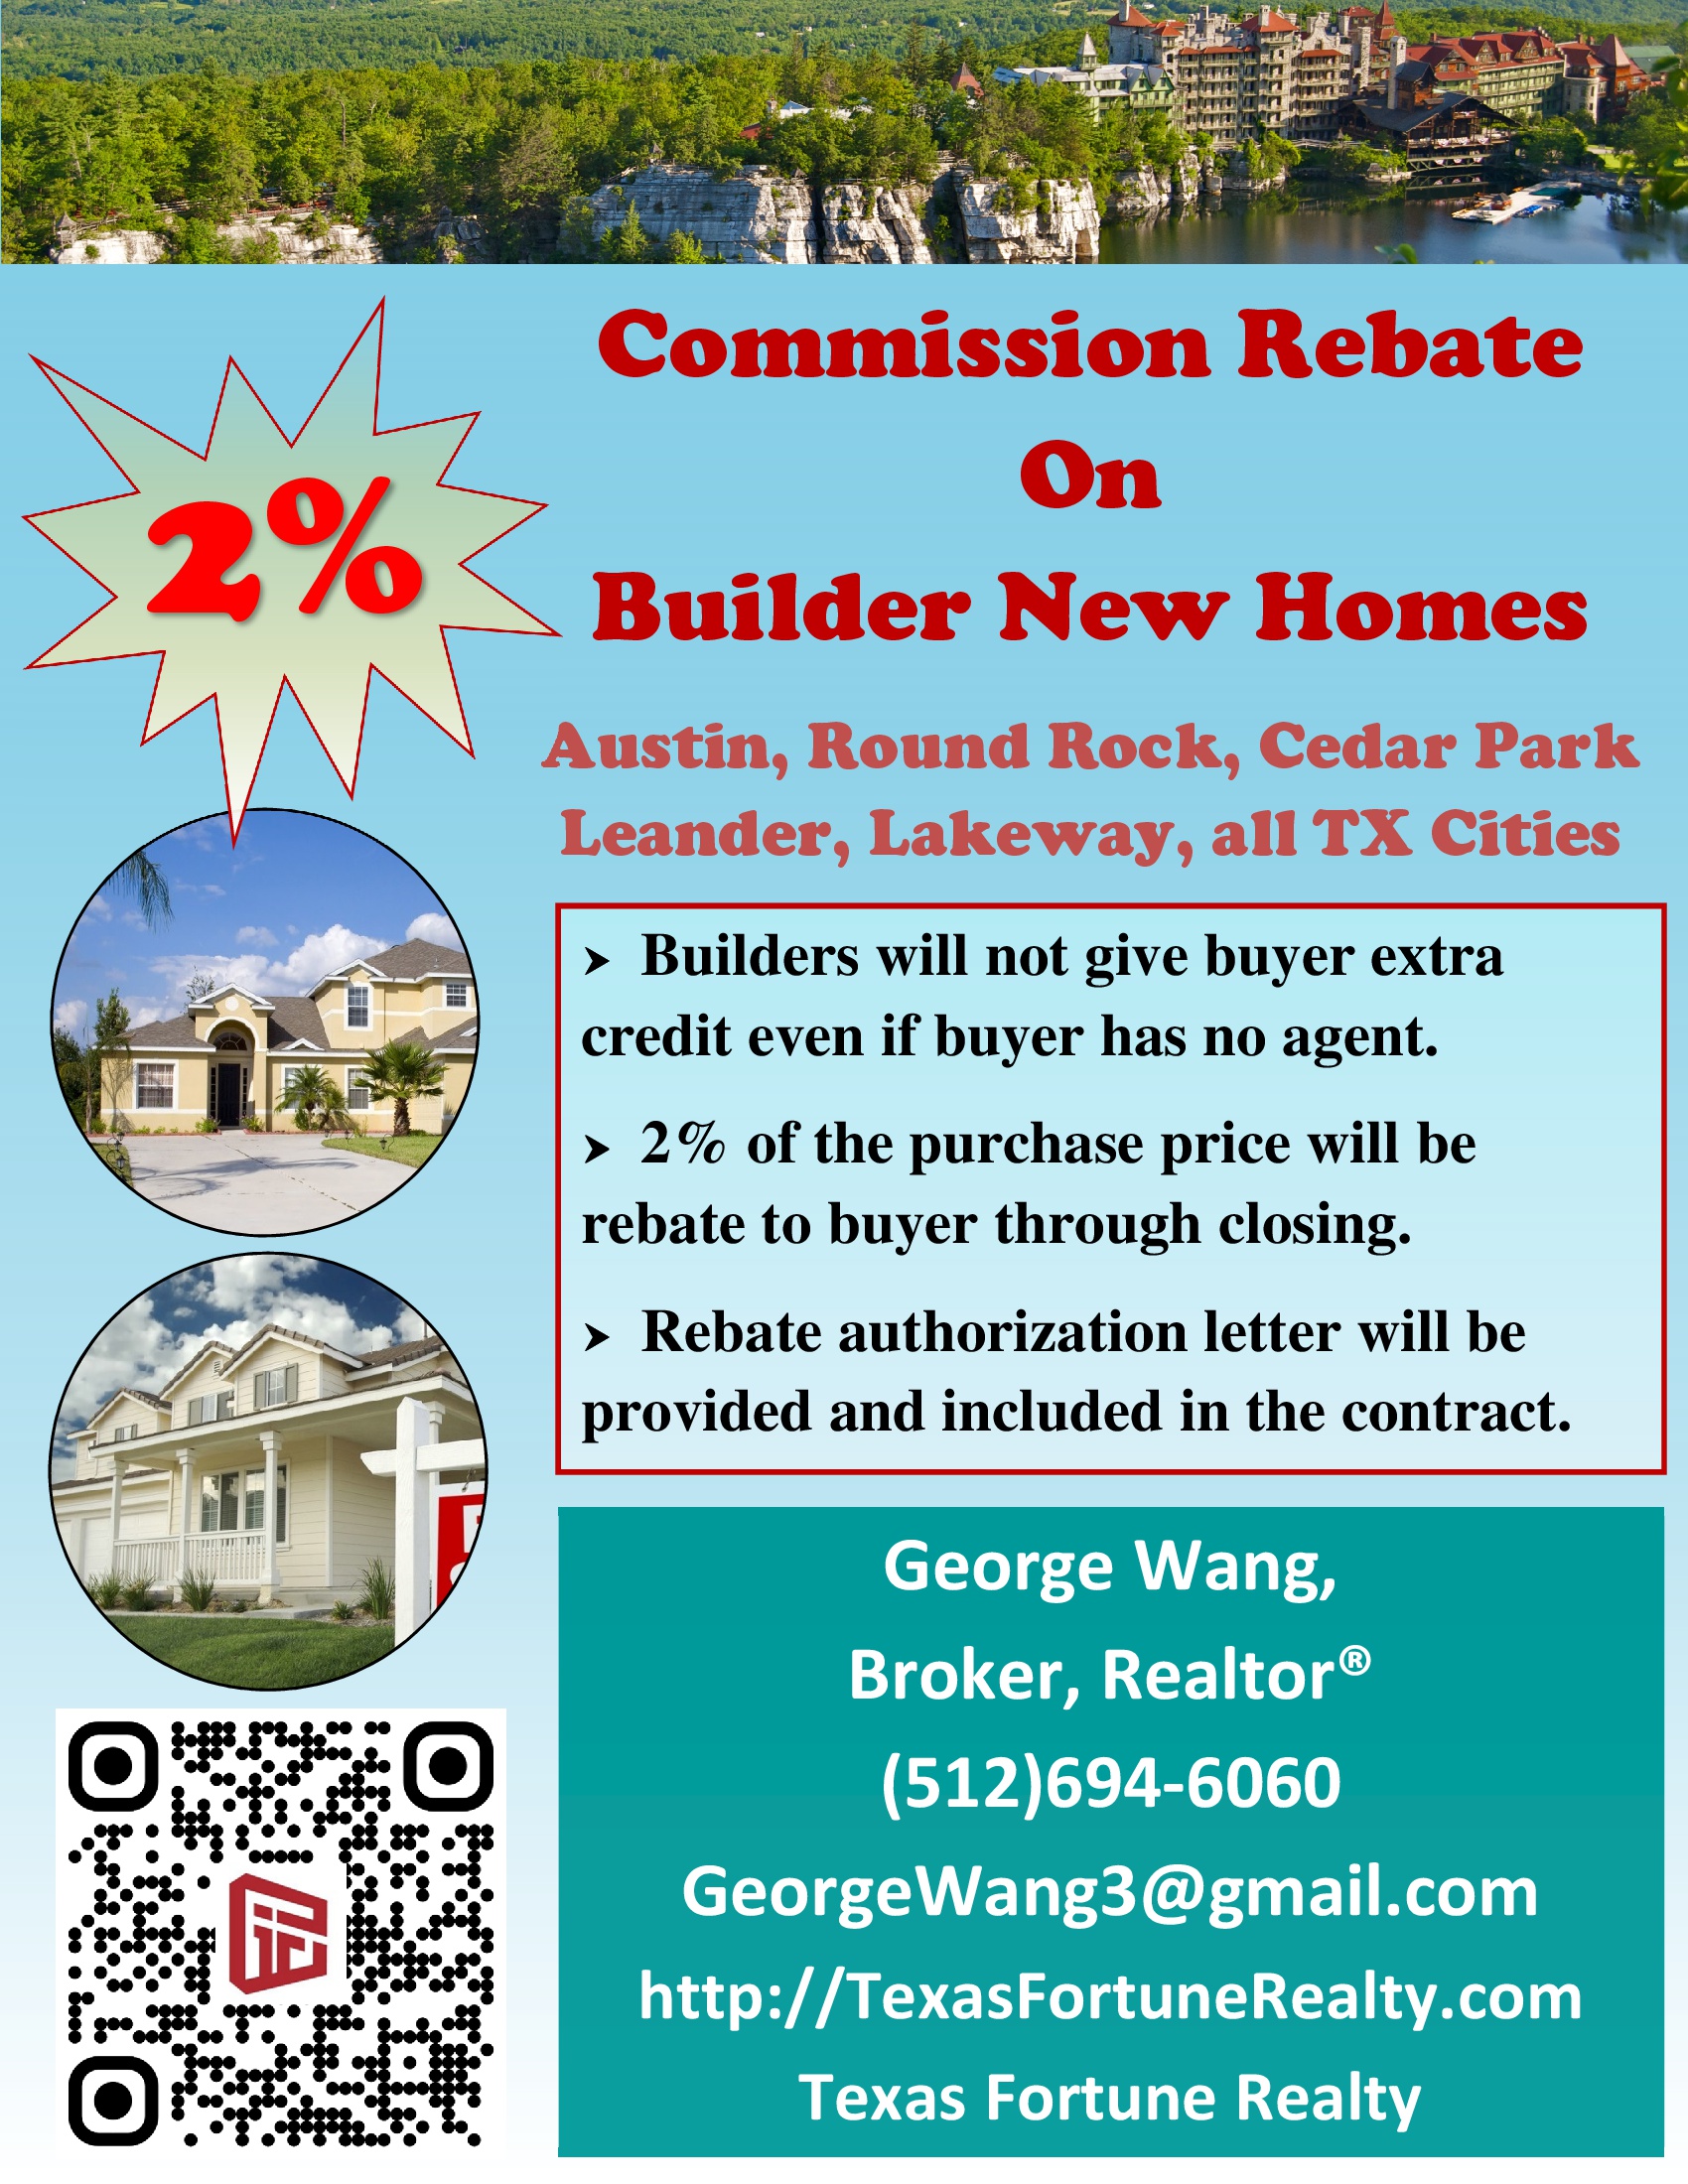 Builder Homes Texas Fortune Realty